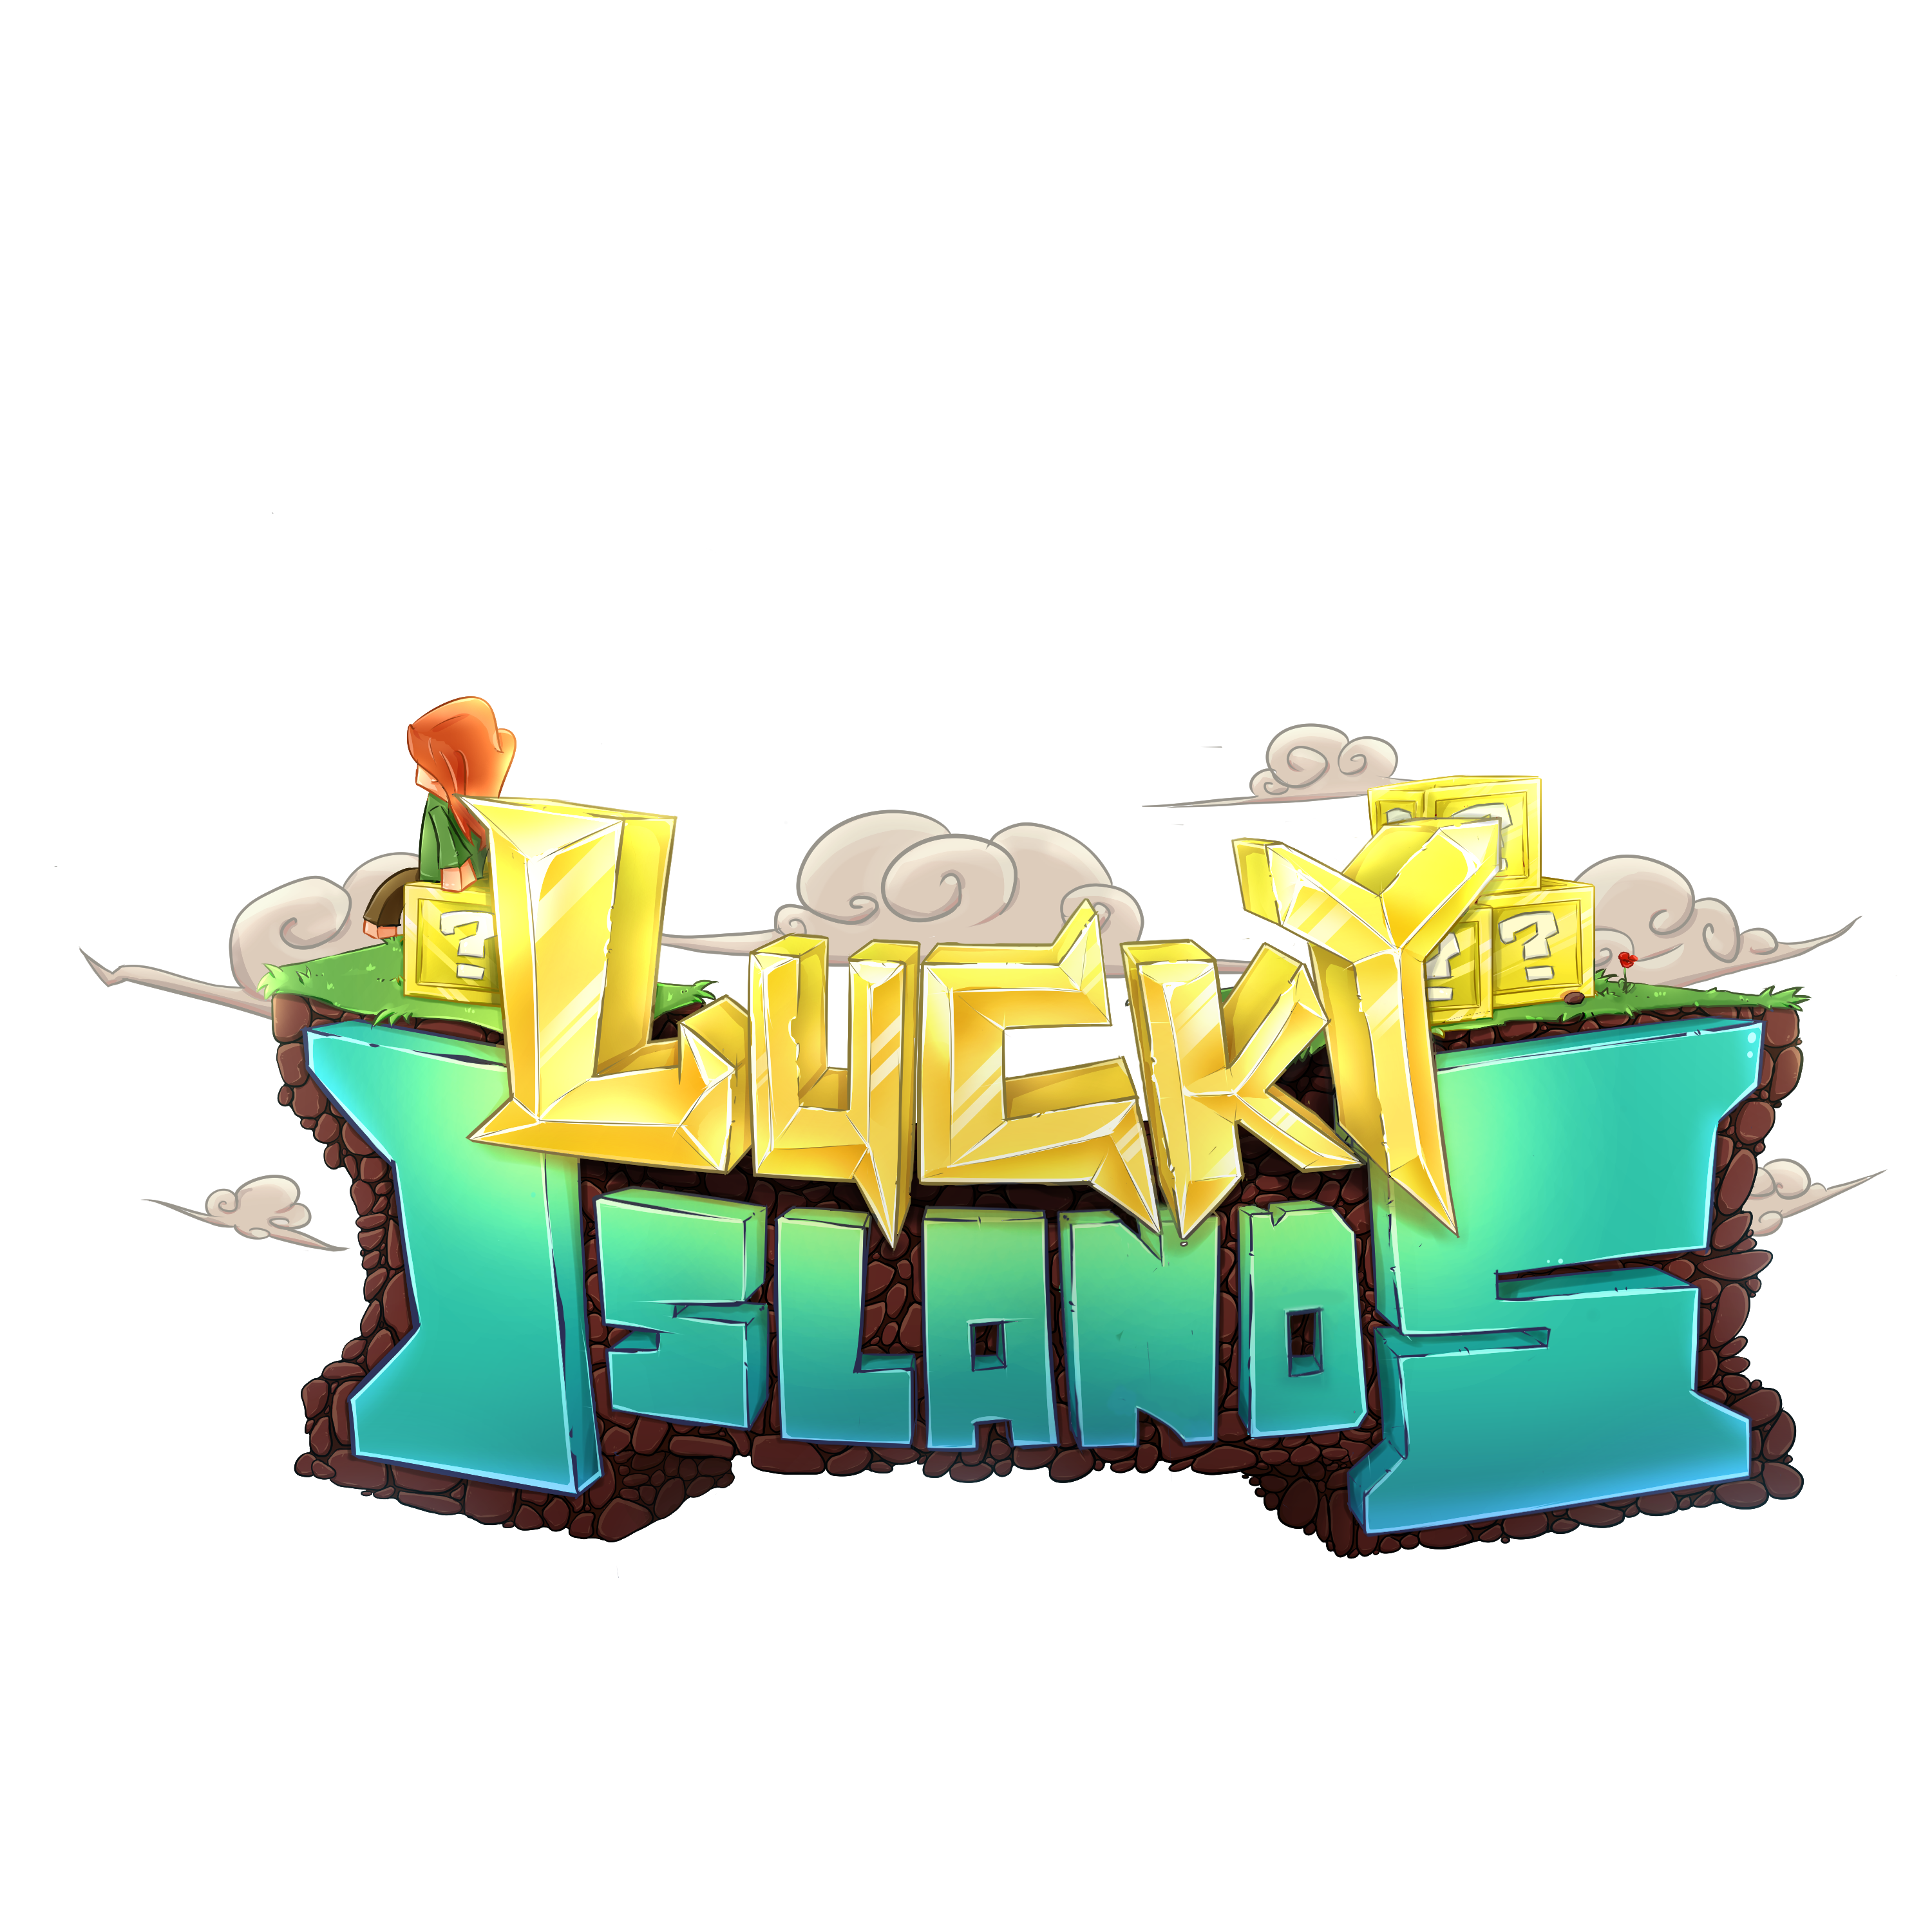 LuckyIsland Logo  clouds no outline.png